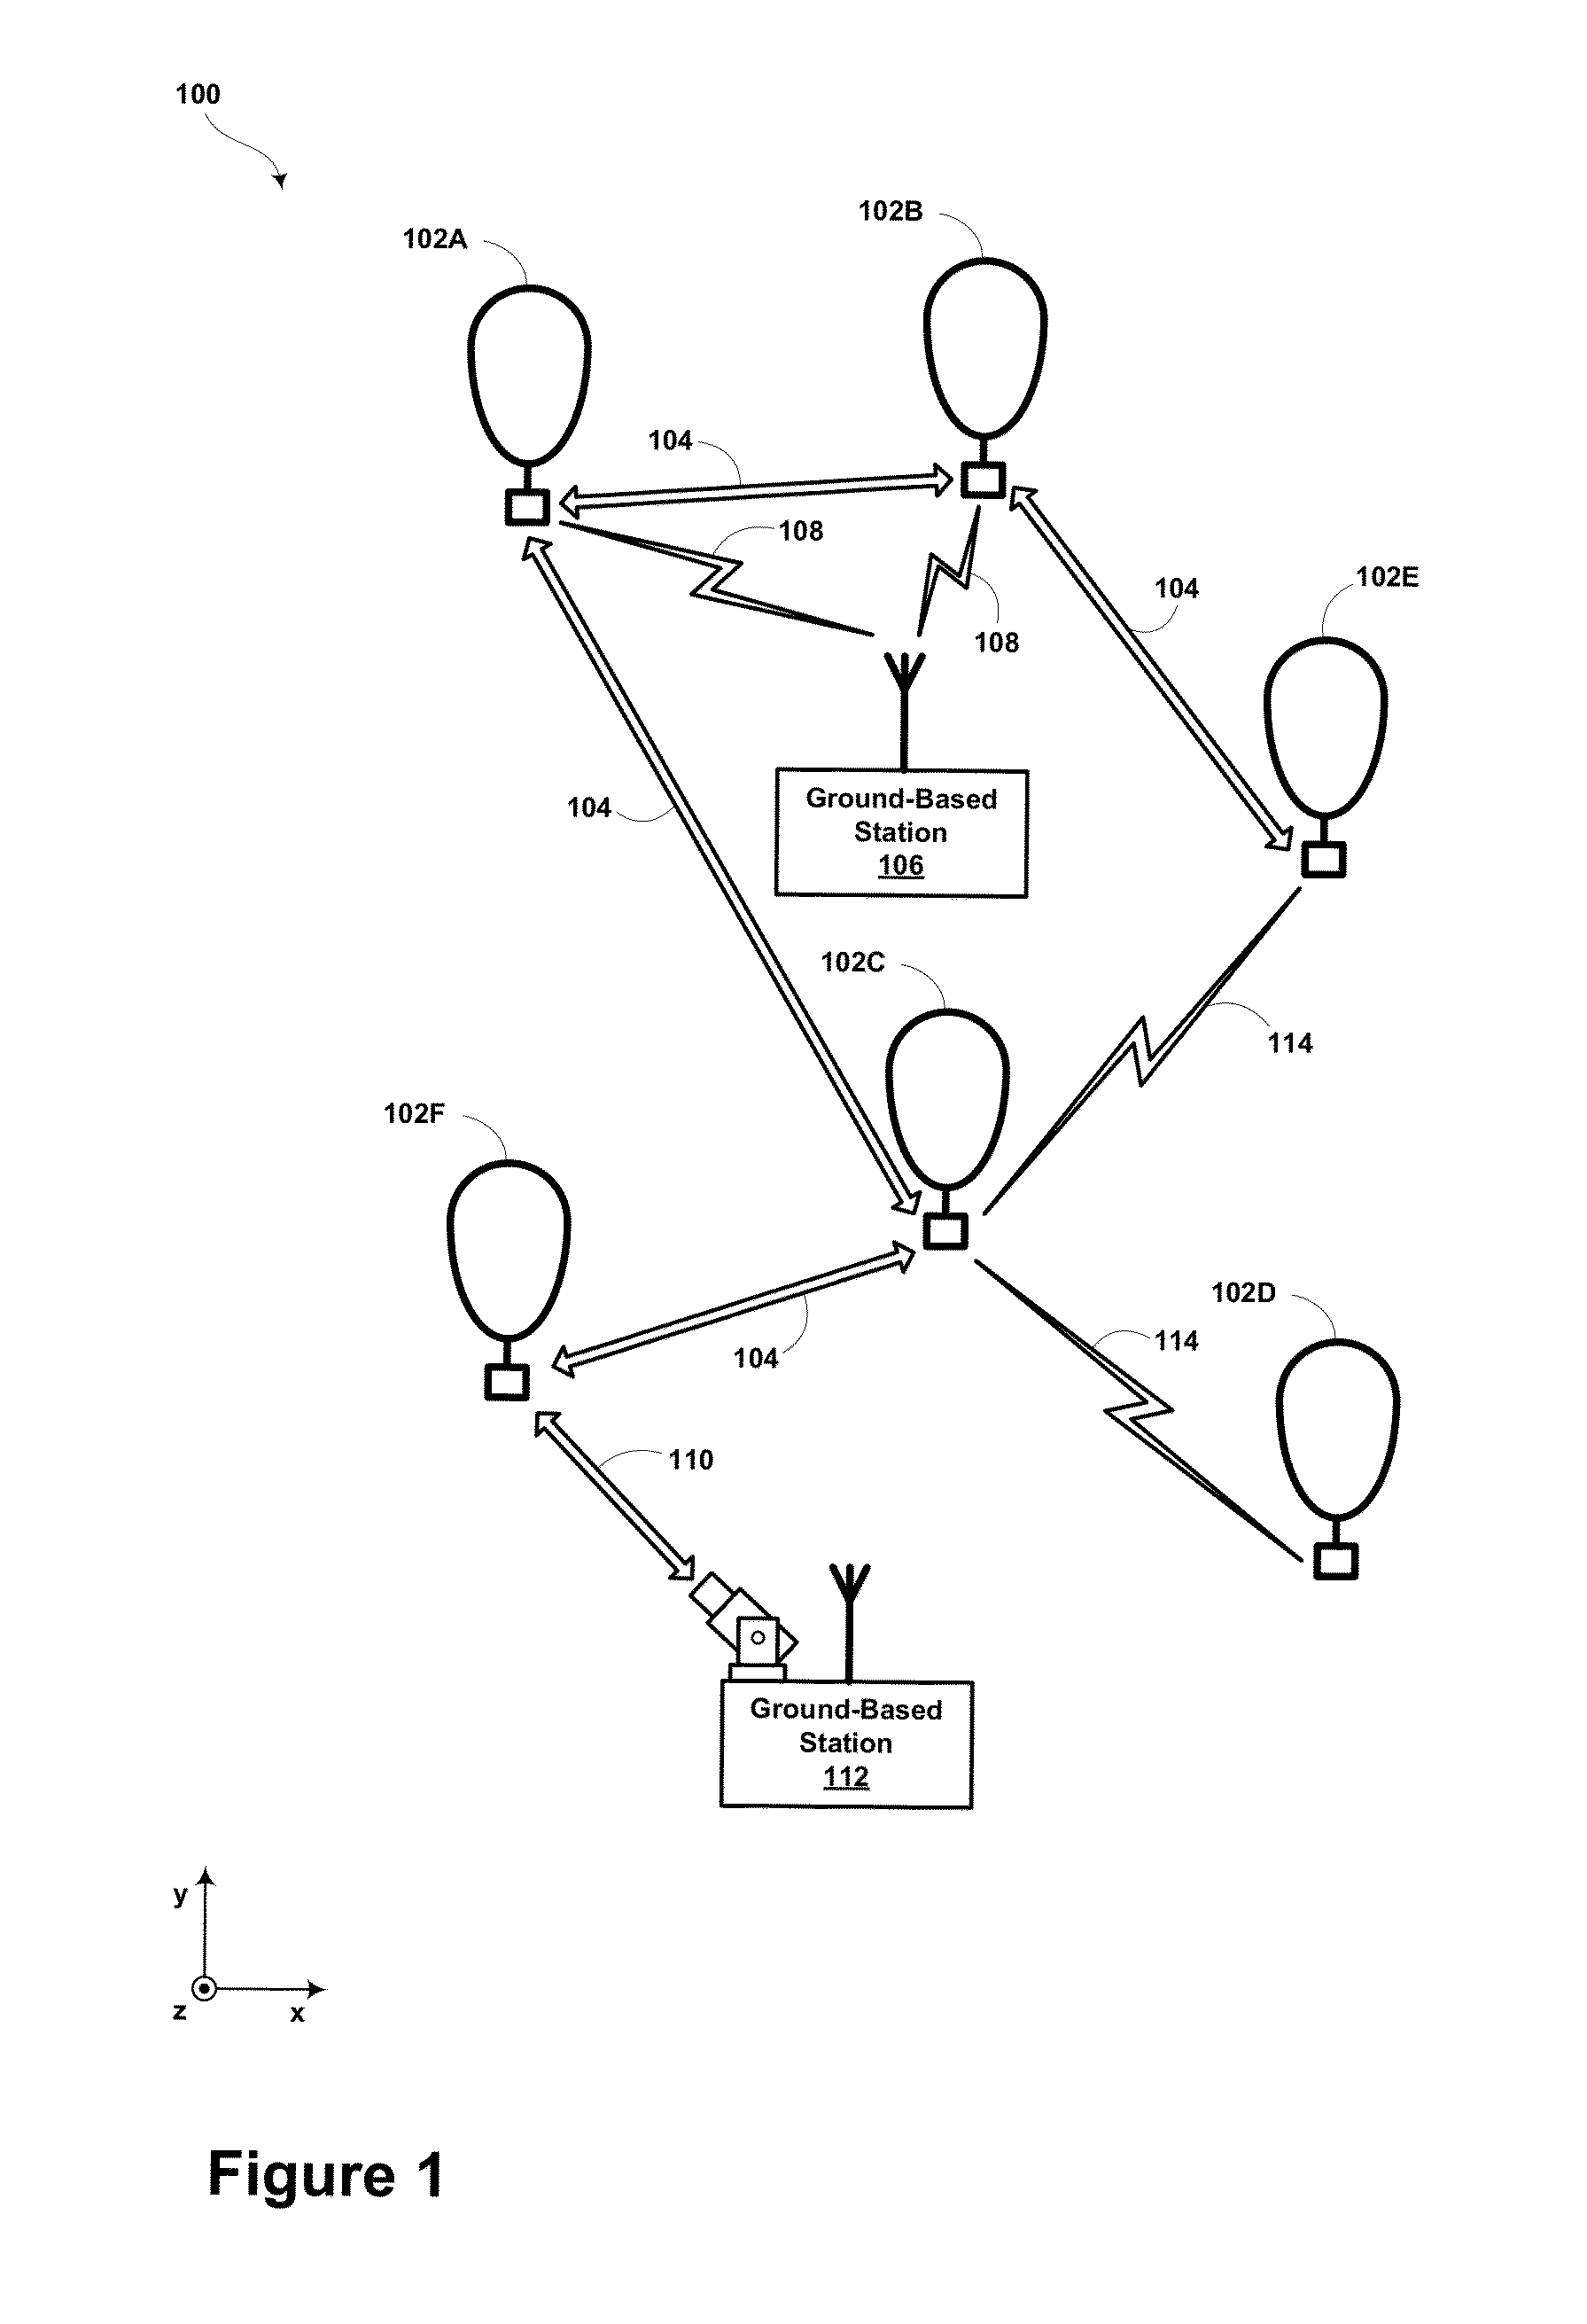 Virtual pooling of local resources in a balloon network